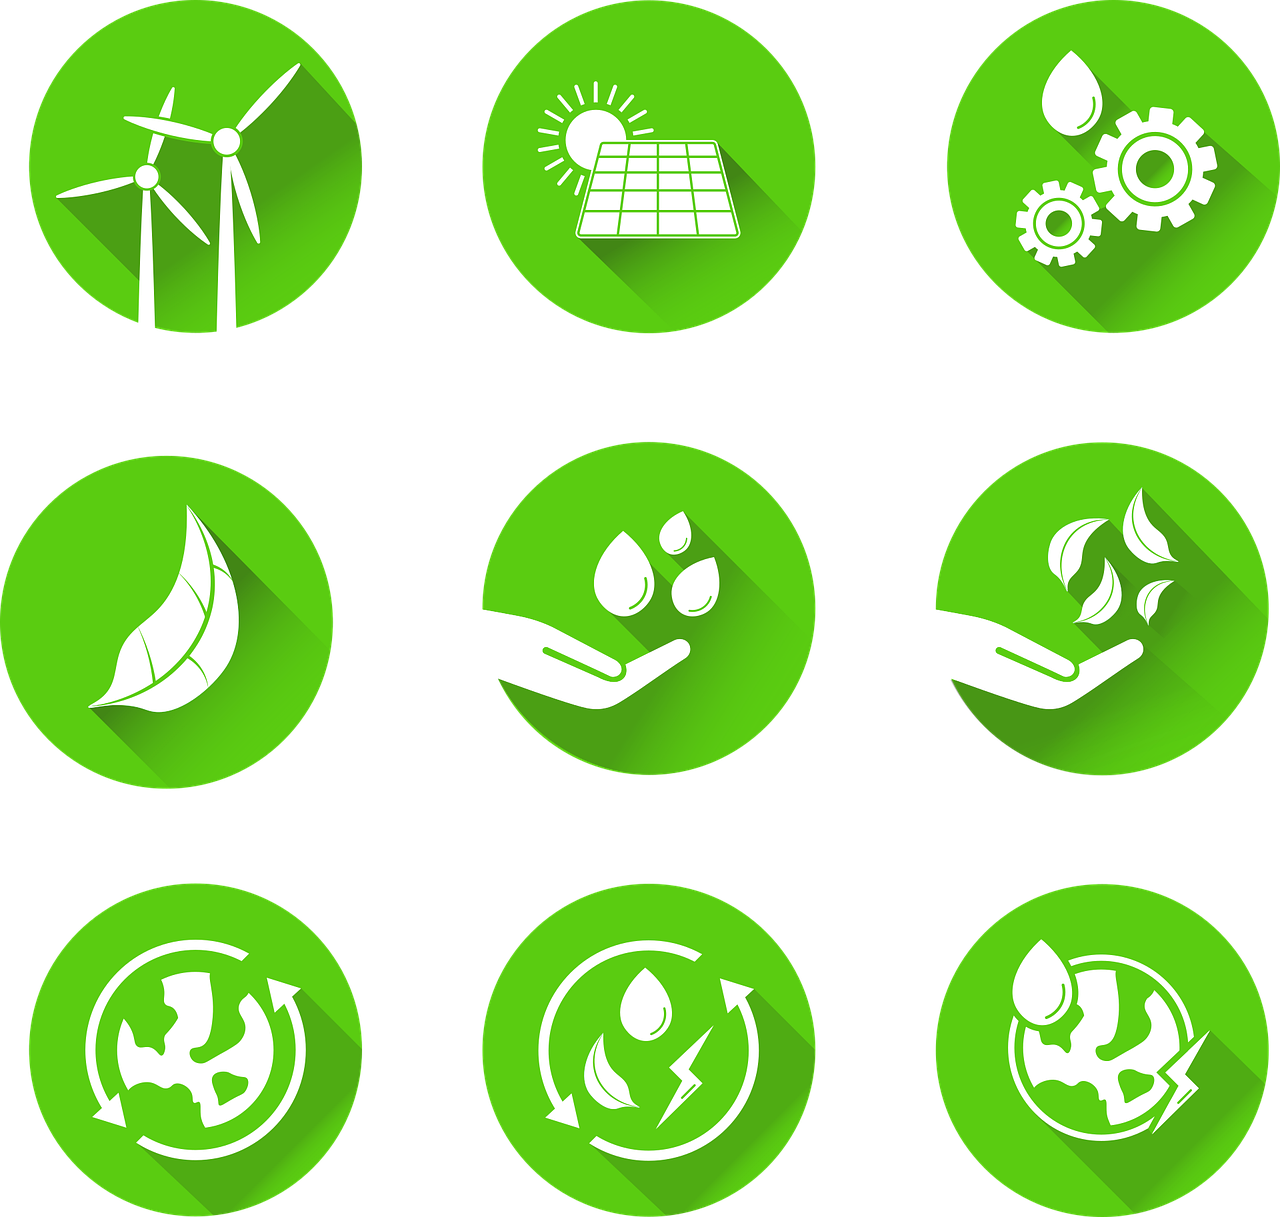 sustainability-icons-gc7afd170a_1280.png